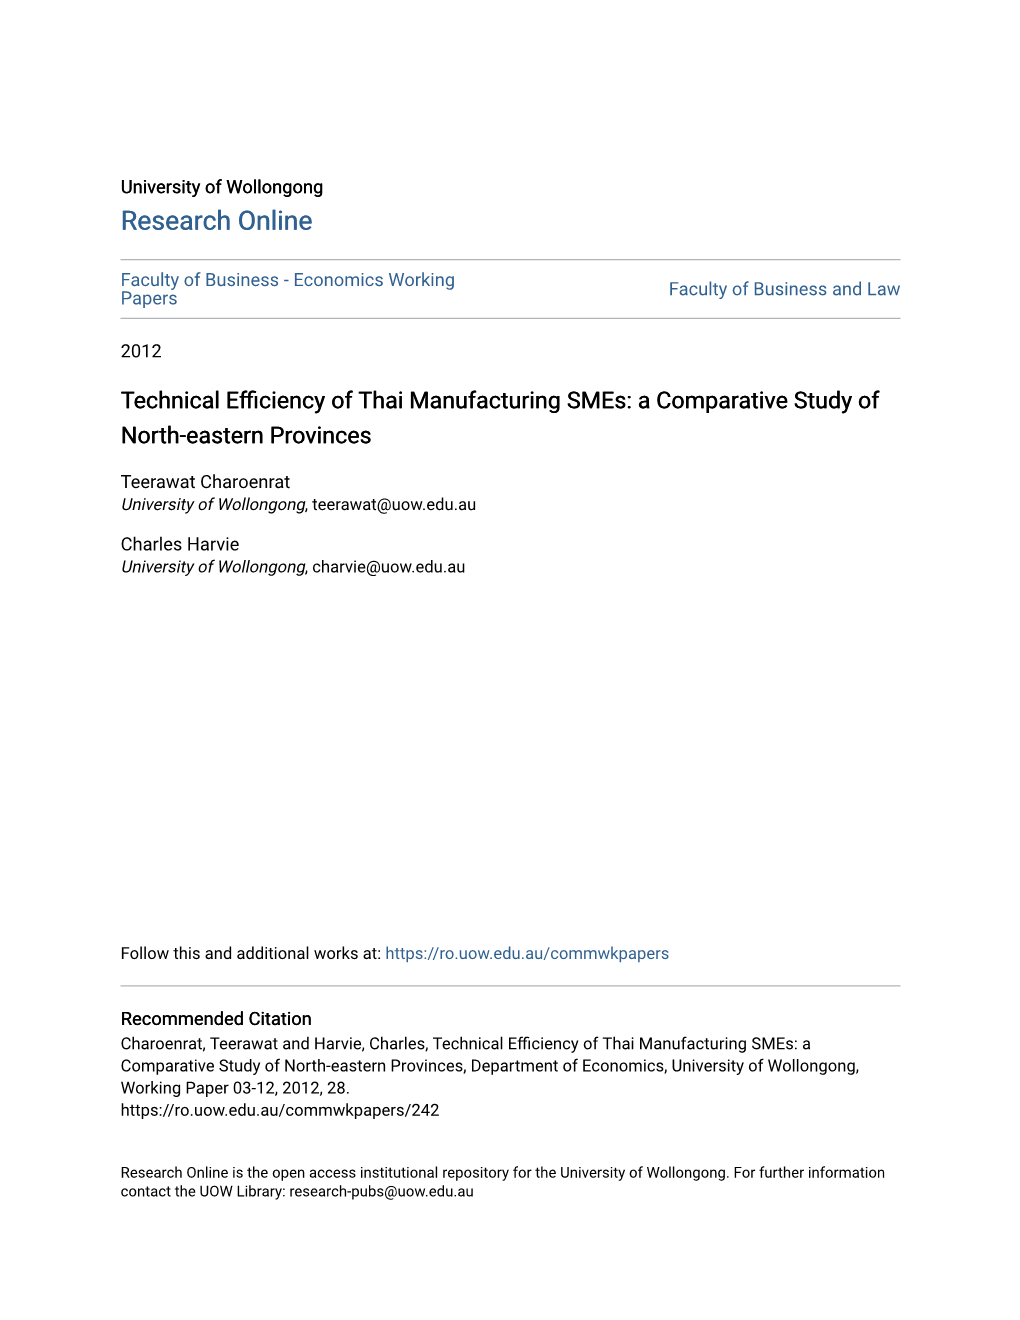 Technical Efficiency of Thai Manufacturing Smes: a Comparative Study of North-Eastern Provinces